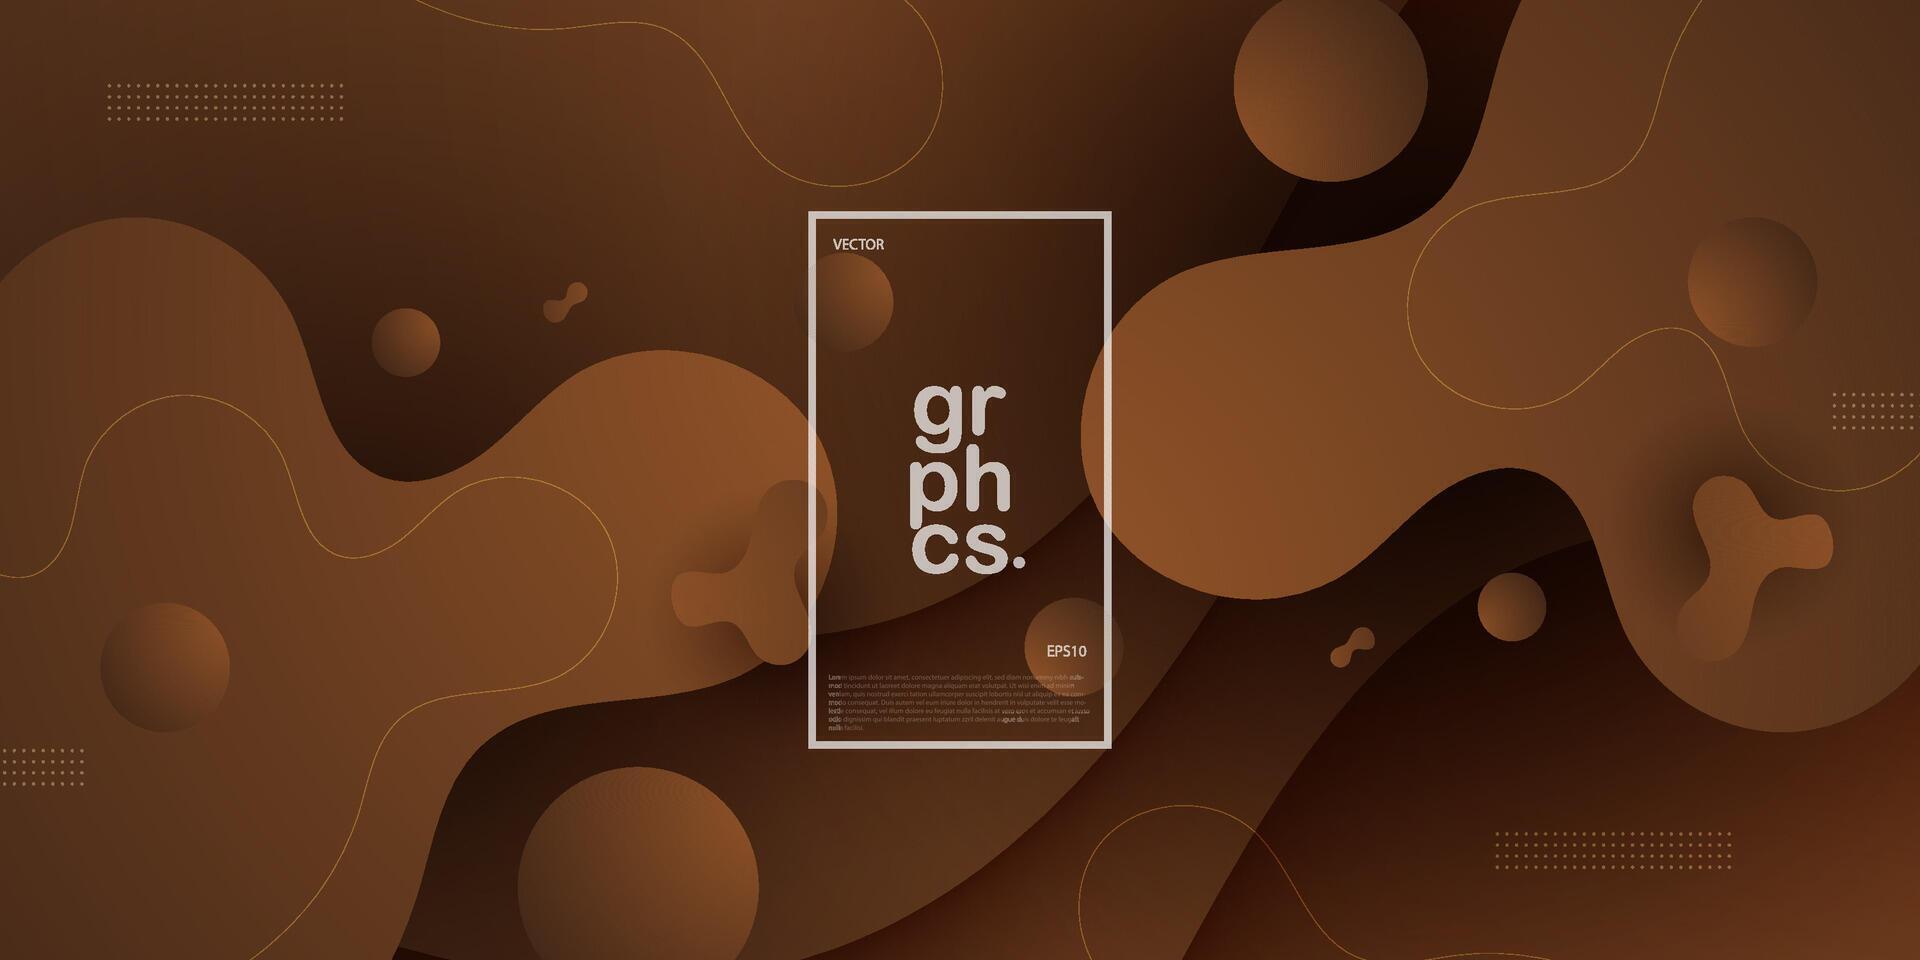 Simple dynamic brown textured background design in 3D style with dark color. Wave and circle pattern design. EPS10 vector